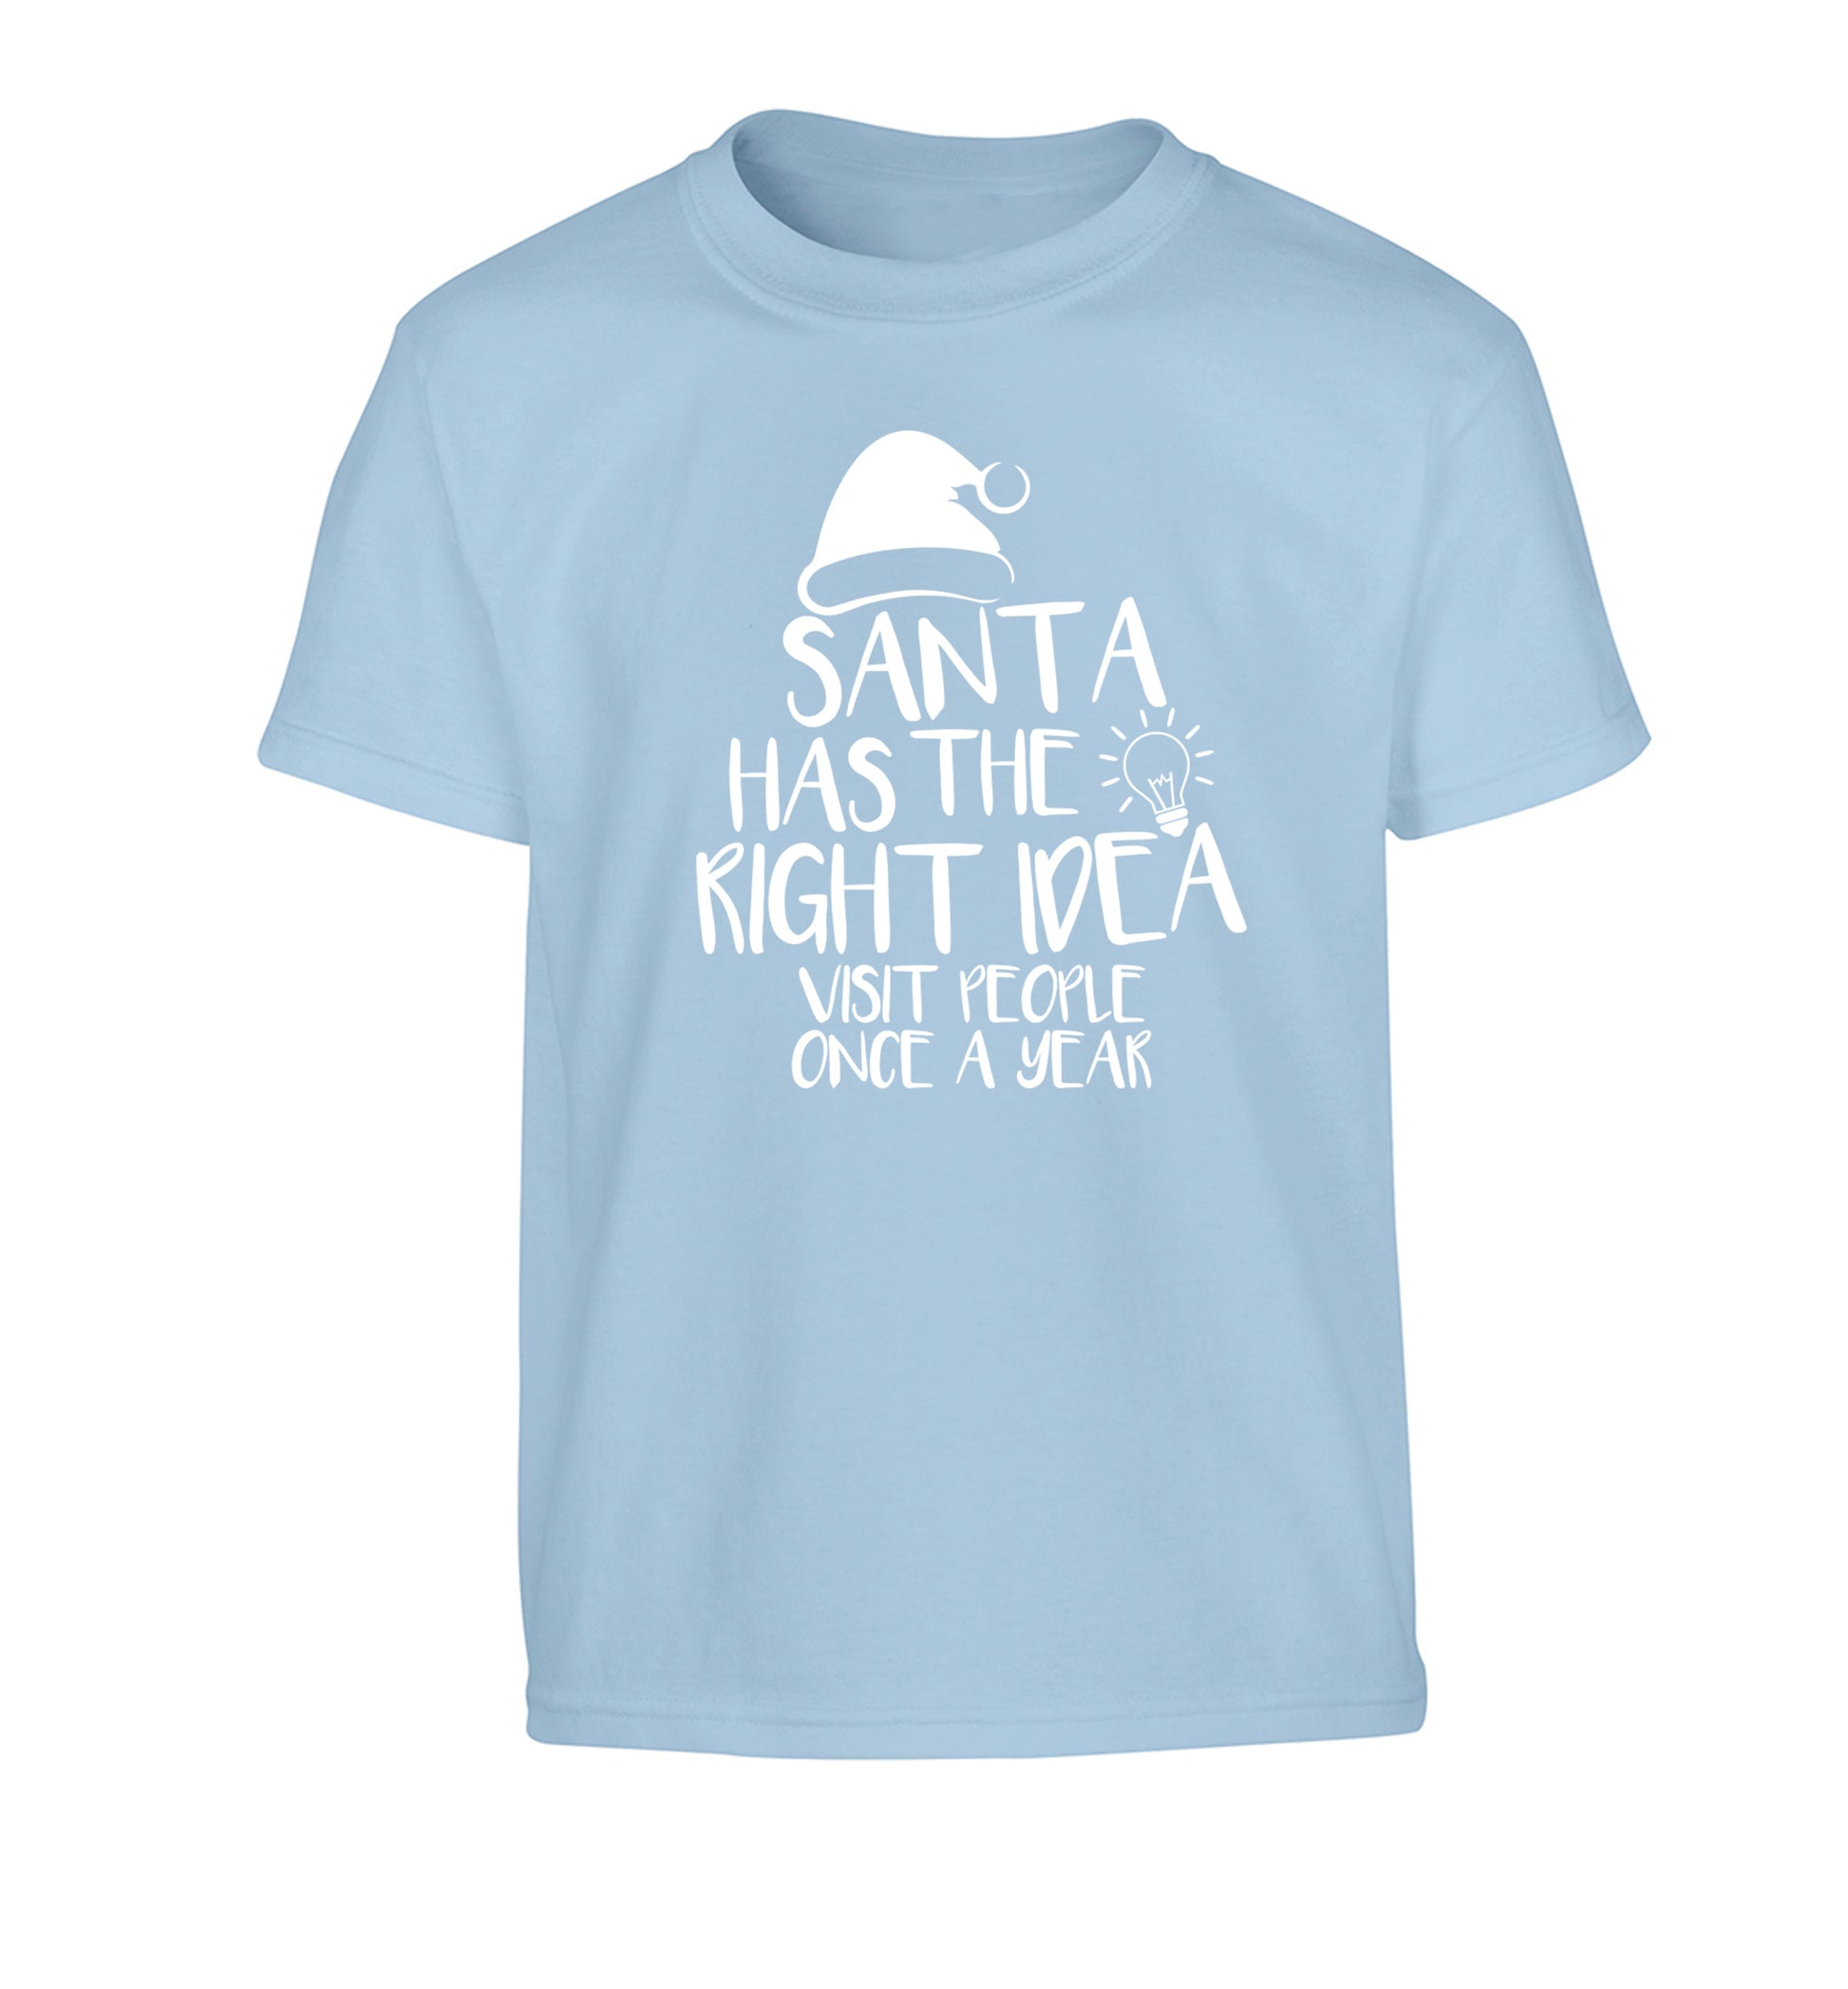 Santa has the right idea visit people once a year Children's light blue Tshirt 12-14 Years